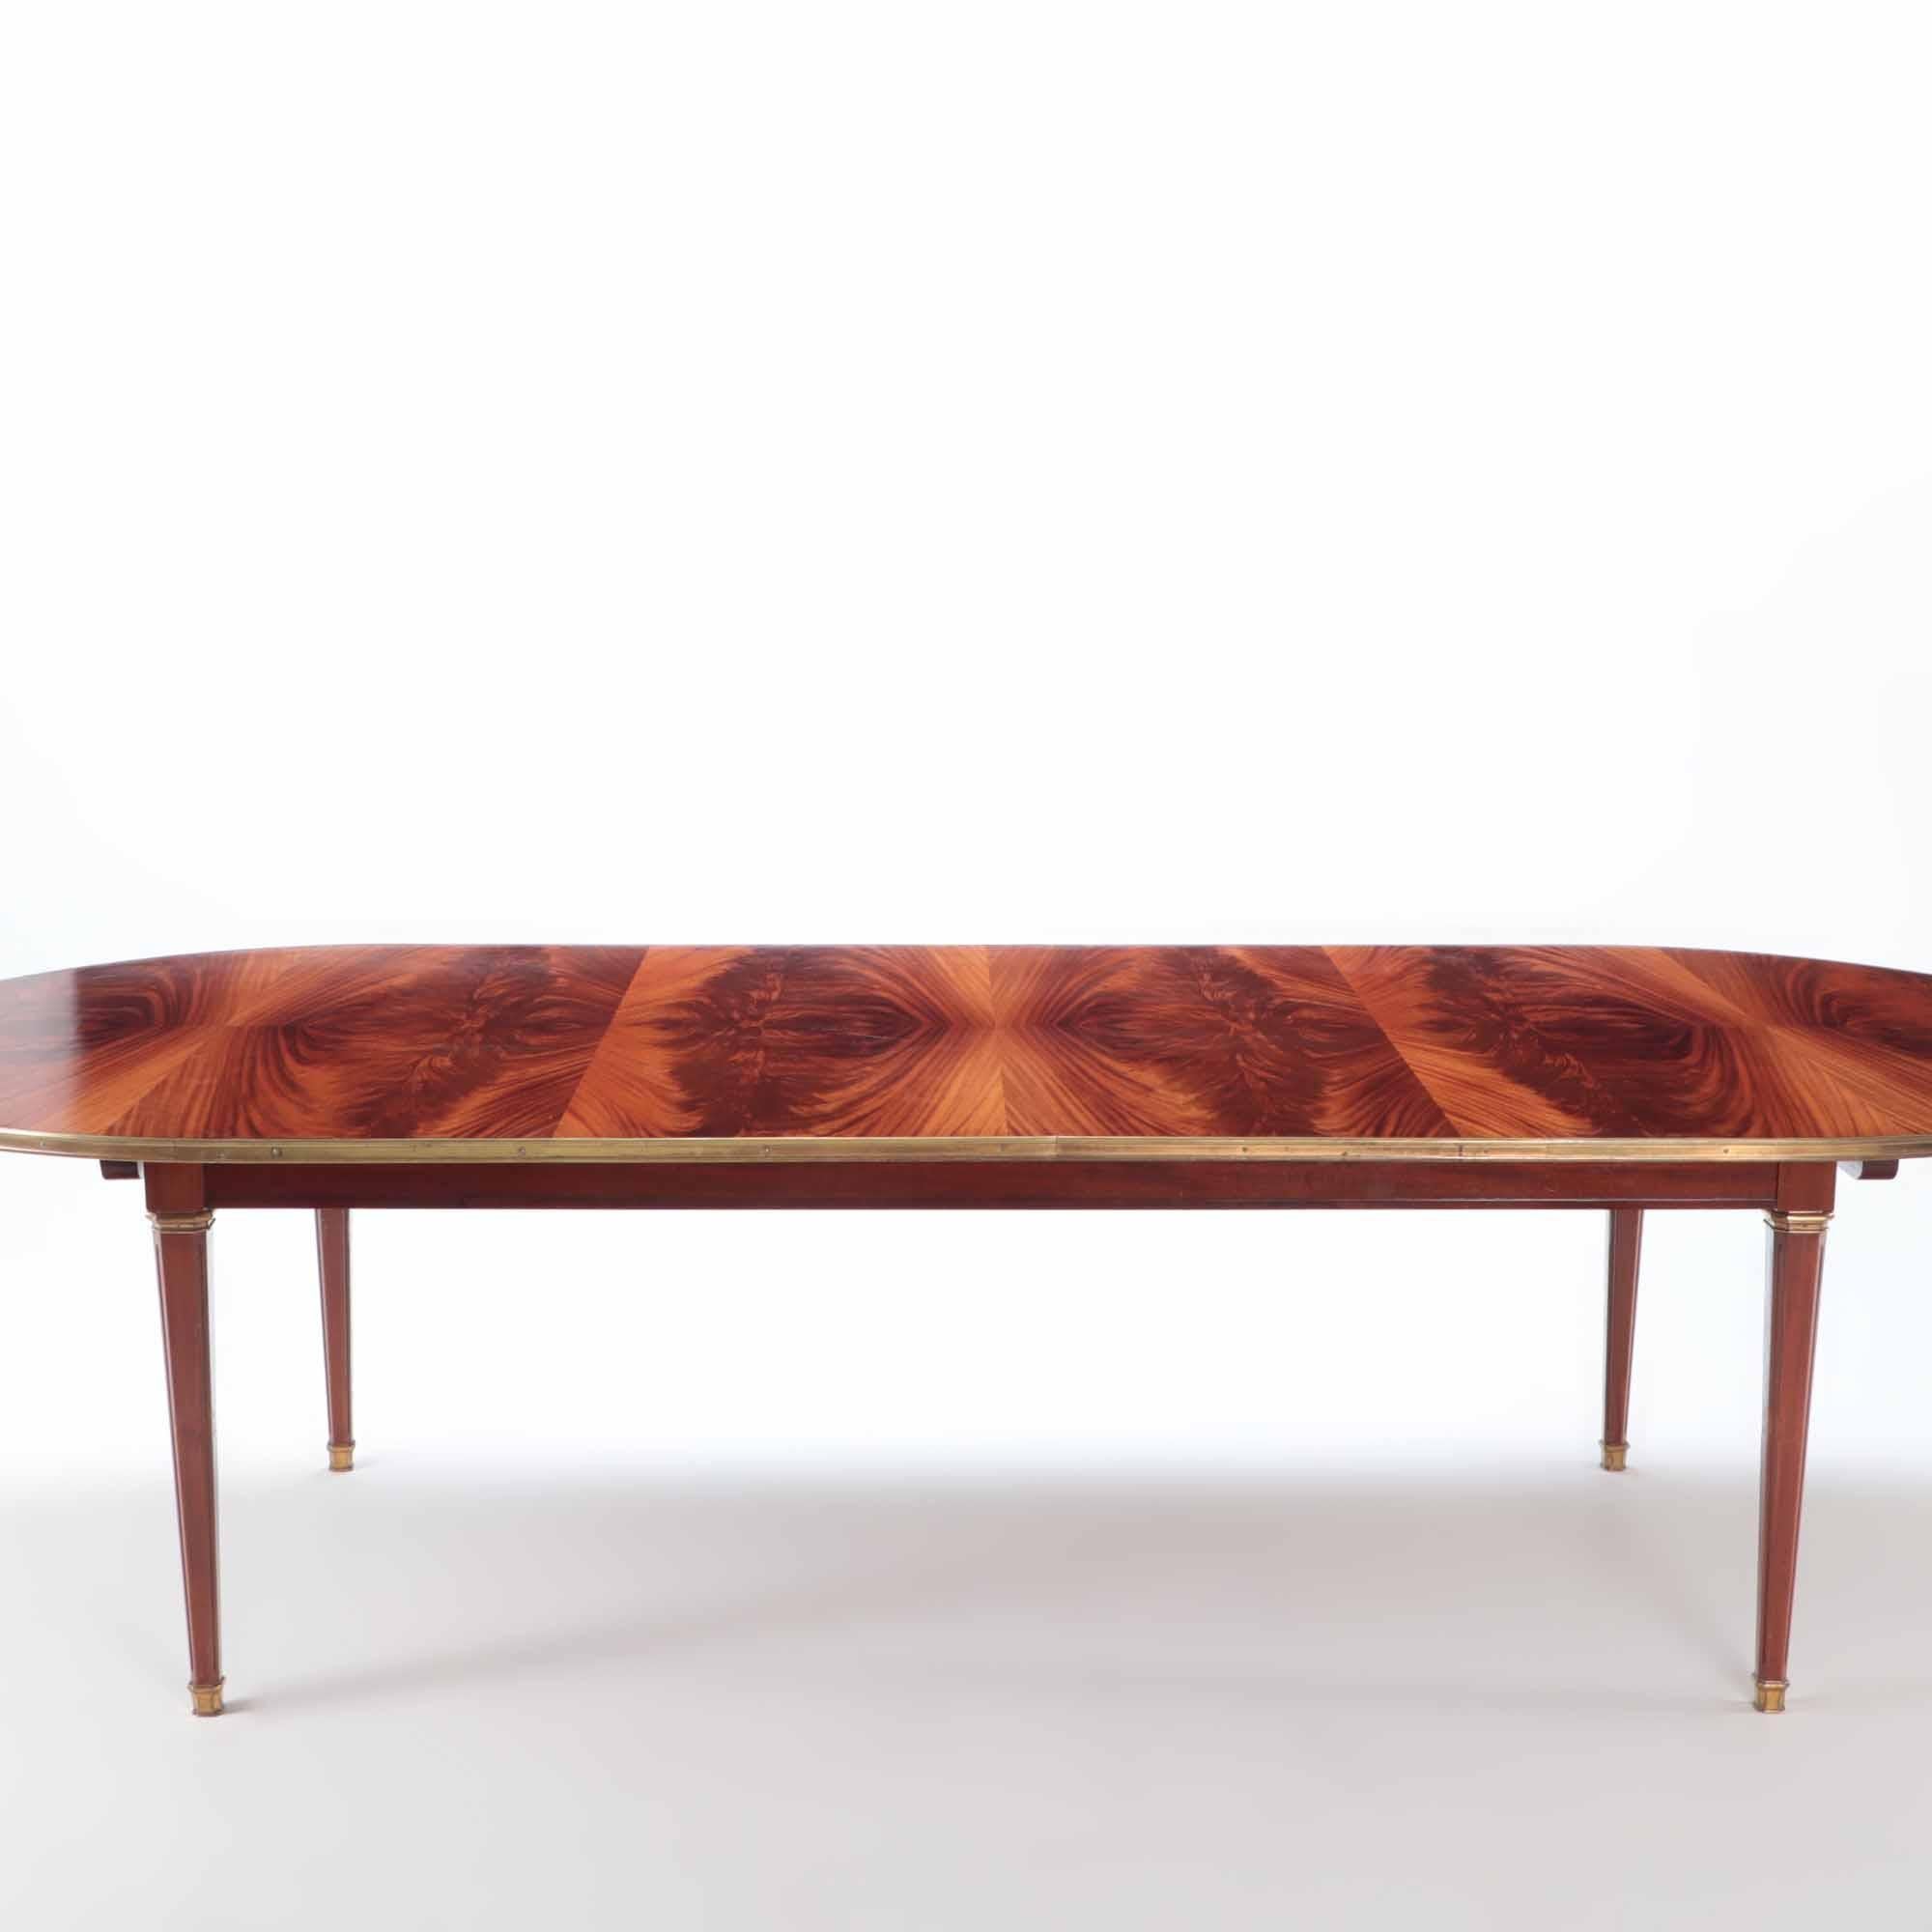 A French Flame mahogany dining table with bronze trim attributed to Jansen. Has two leaves with fall down legs for additional support. Square tapering legs ending in brass sabots. circa 1945. Each leaf is 30